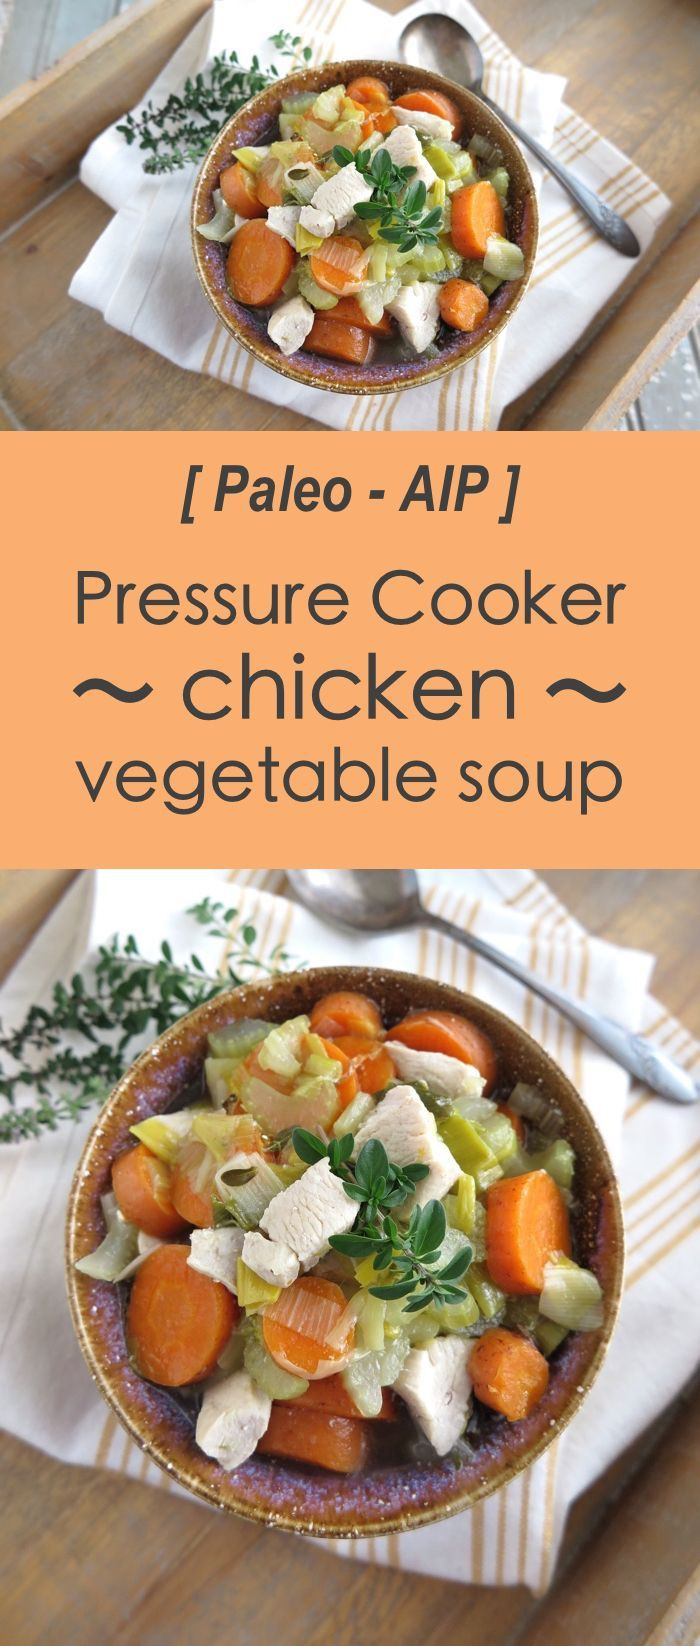 Pressure Cooker Chicken Thighs Paleo
 17 Best images about AIP on Pinterest